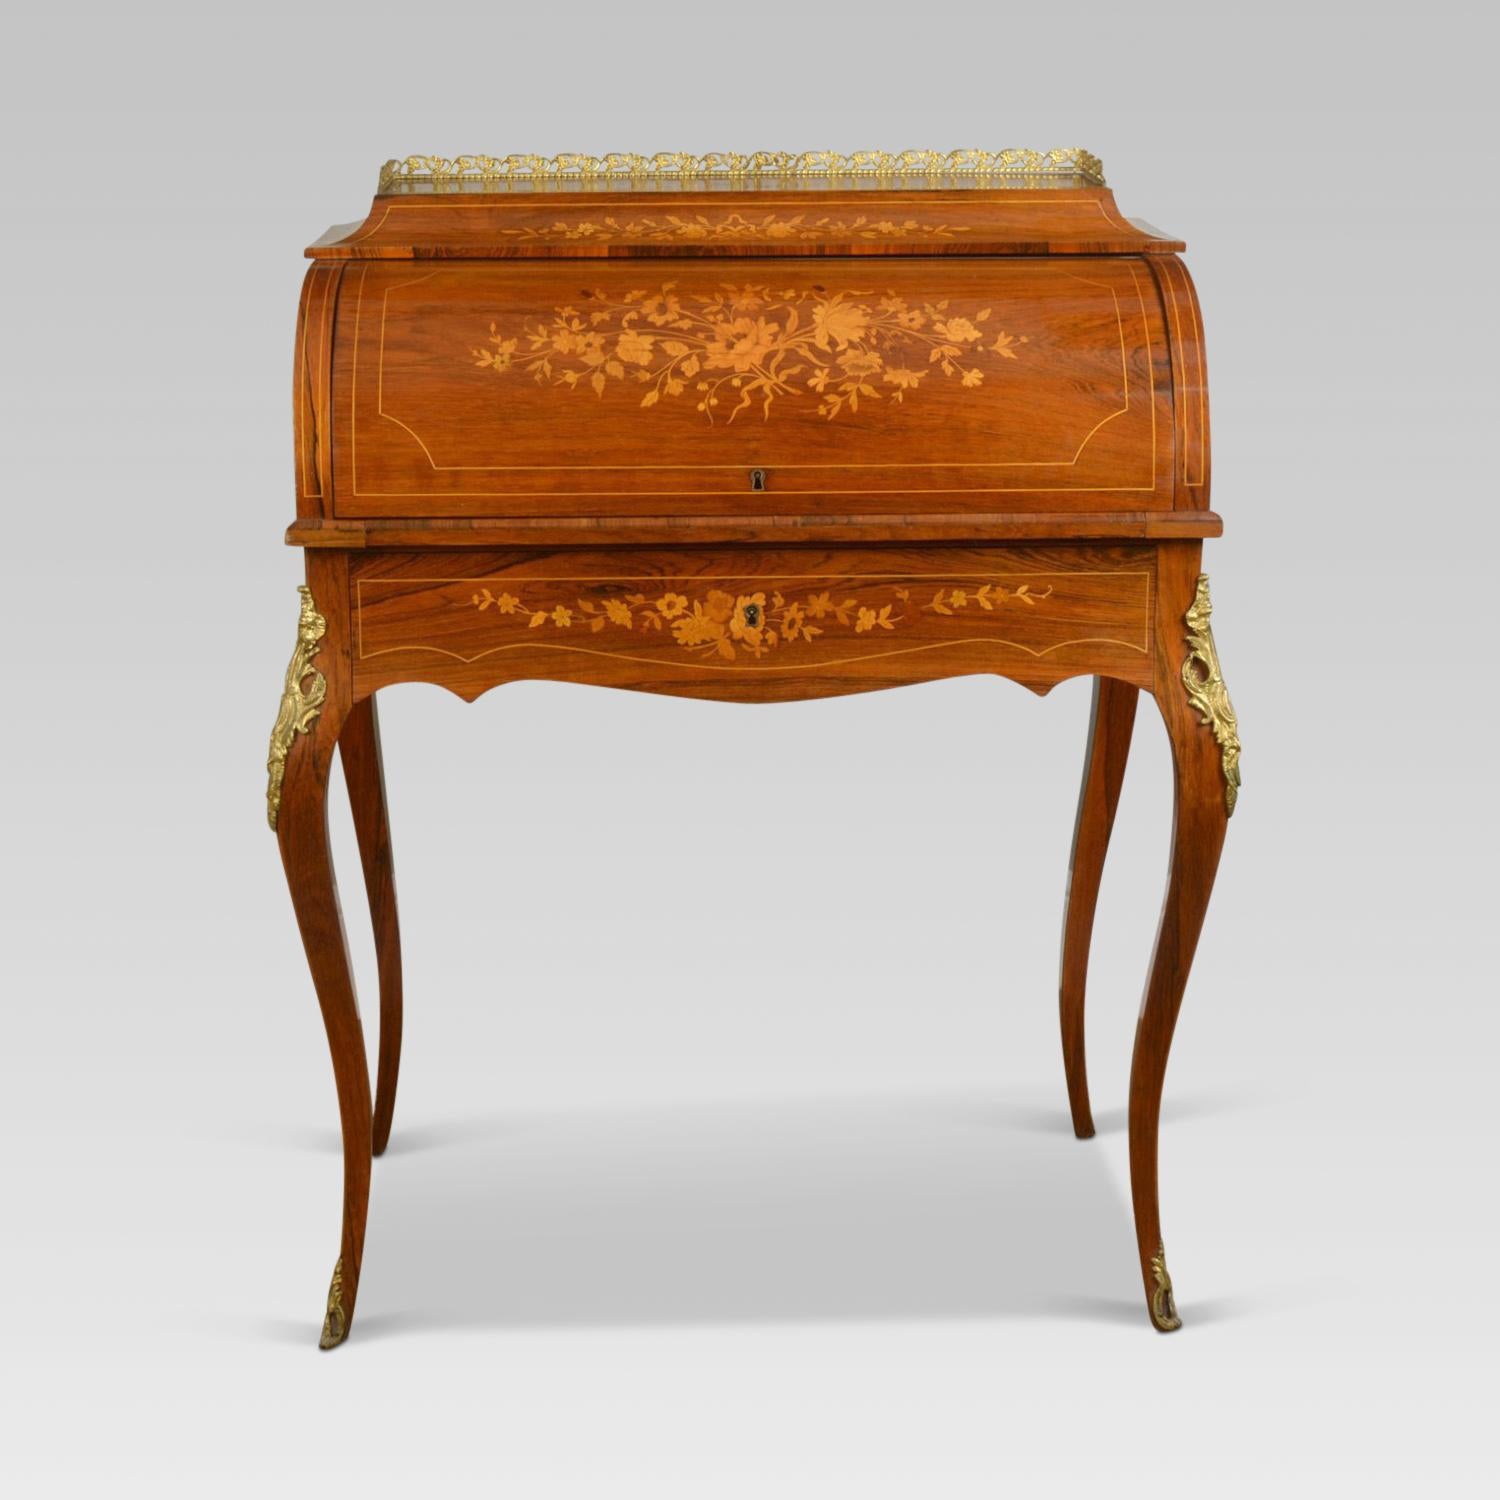 French rosewood and marquetry bureau de dame, the top with a cast brass three quarter gallery over a cylinder front inlaid with a floral bouquet in satinwood, birch and harewood, opening to reveal a pullout writing surface and with three small